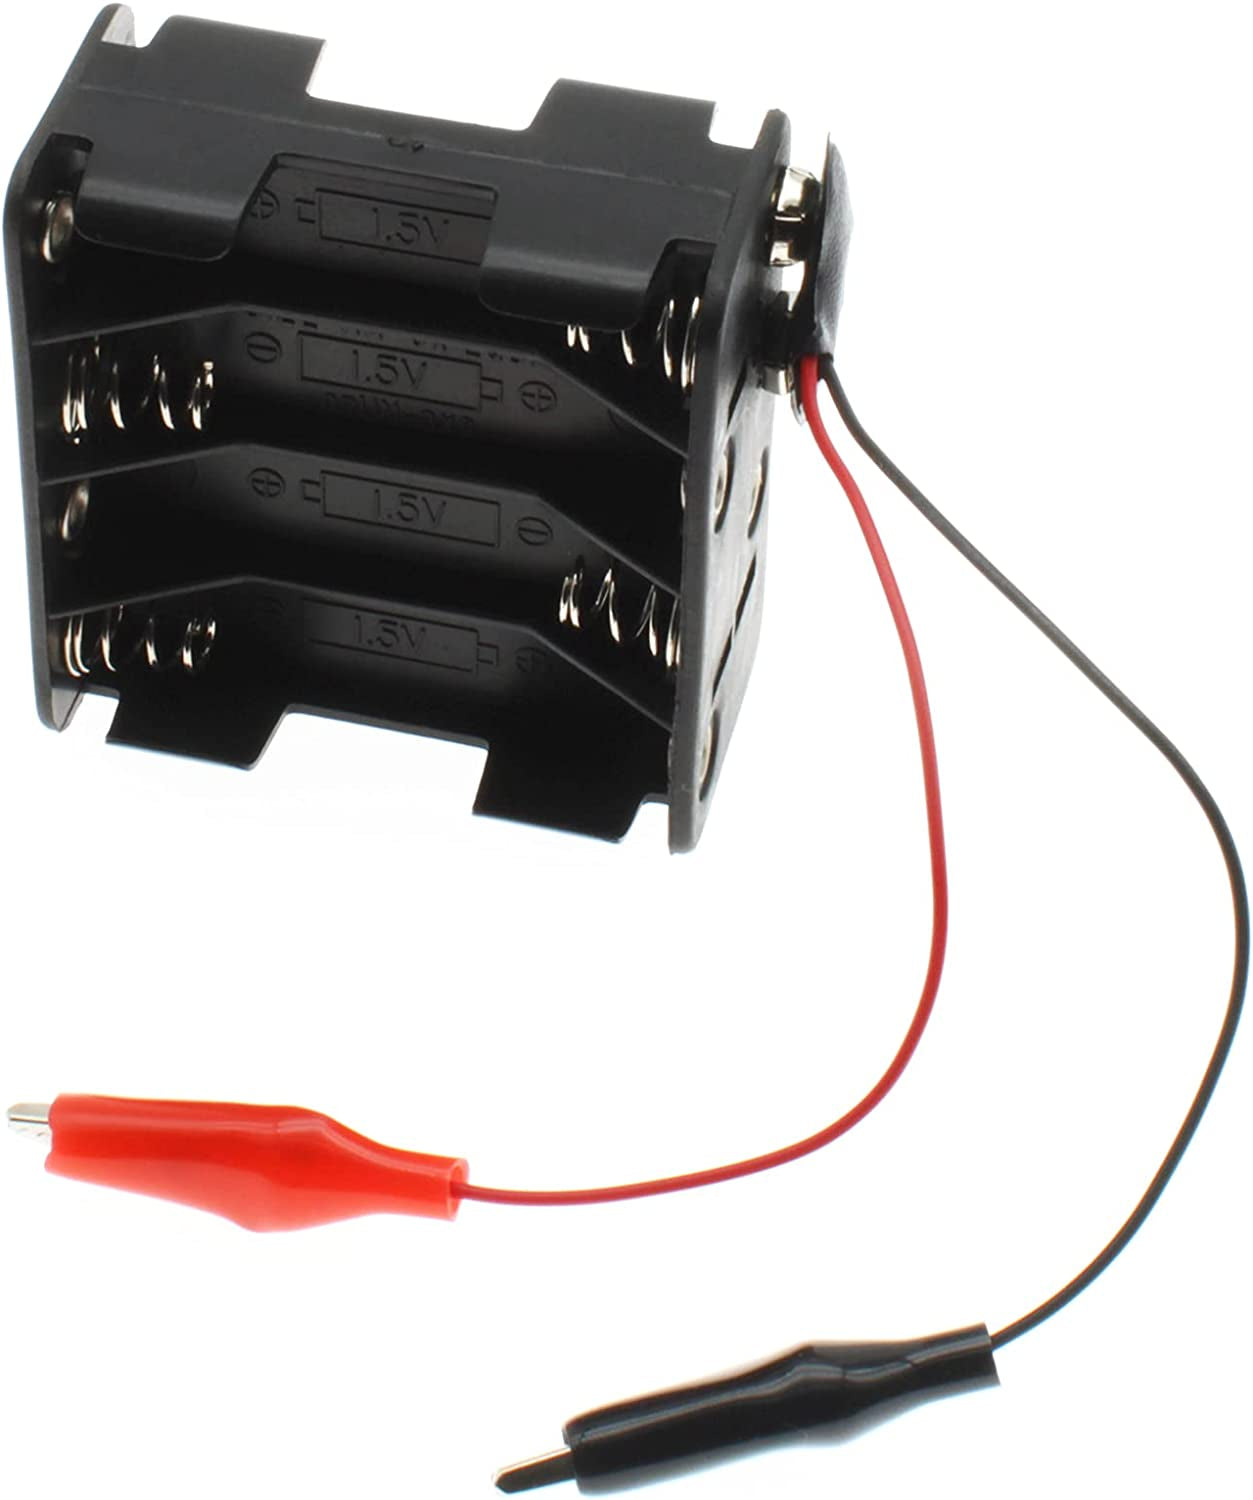 2Sets 8X 1.5V Battery Holder with T Type Wired Battery Alligator Clip Standard Snap Connector Kit 12V Thicken Plastic Battery Case